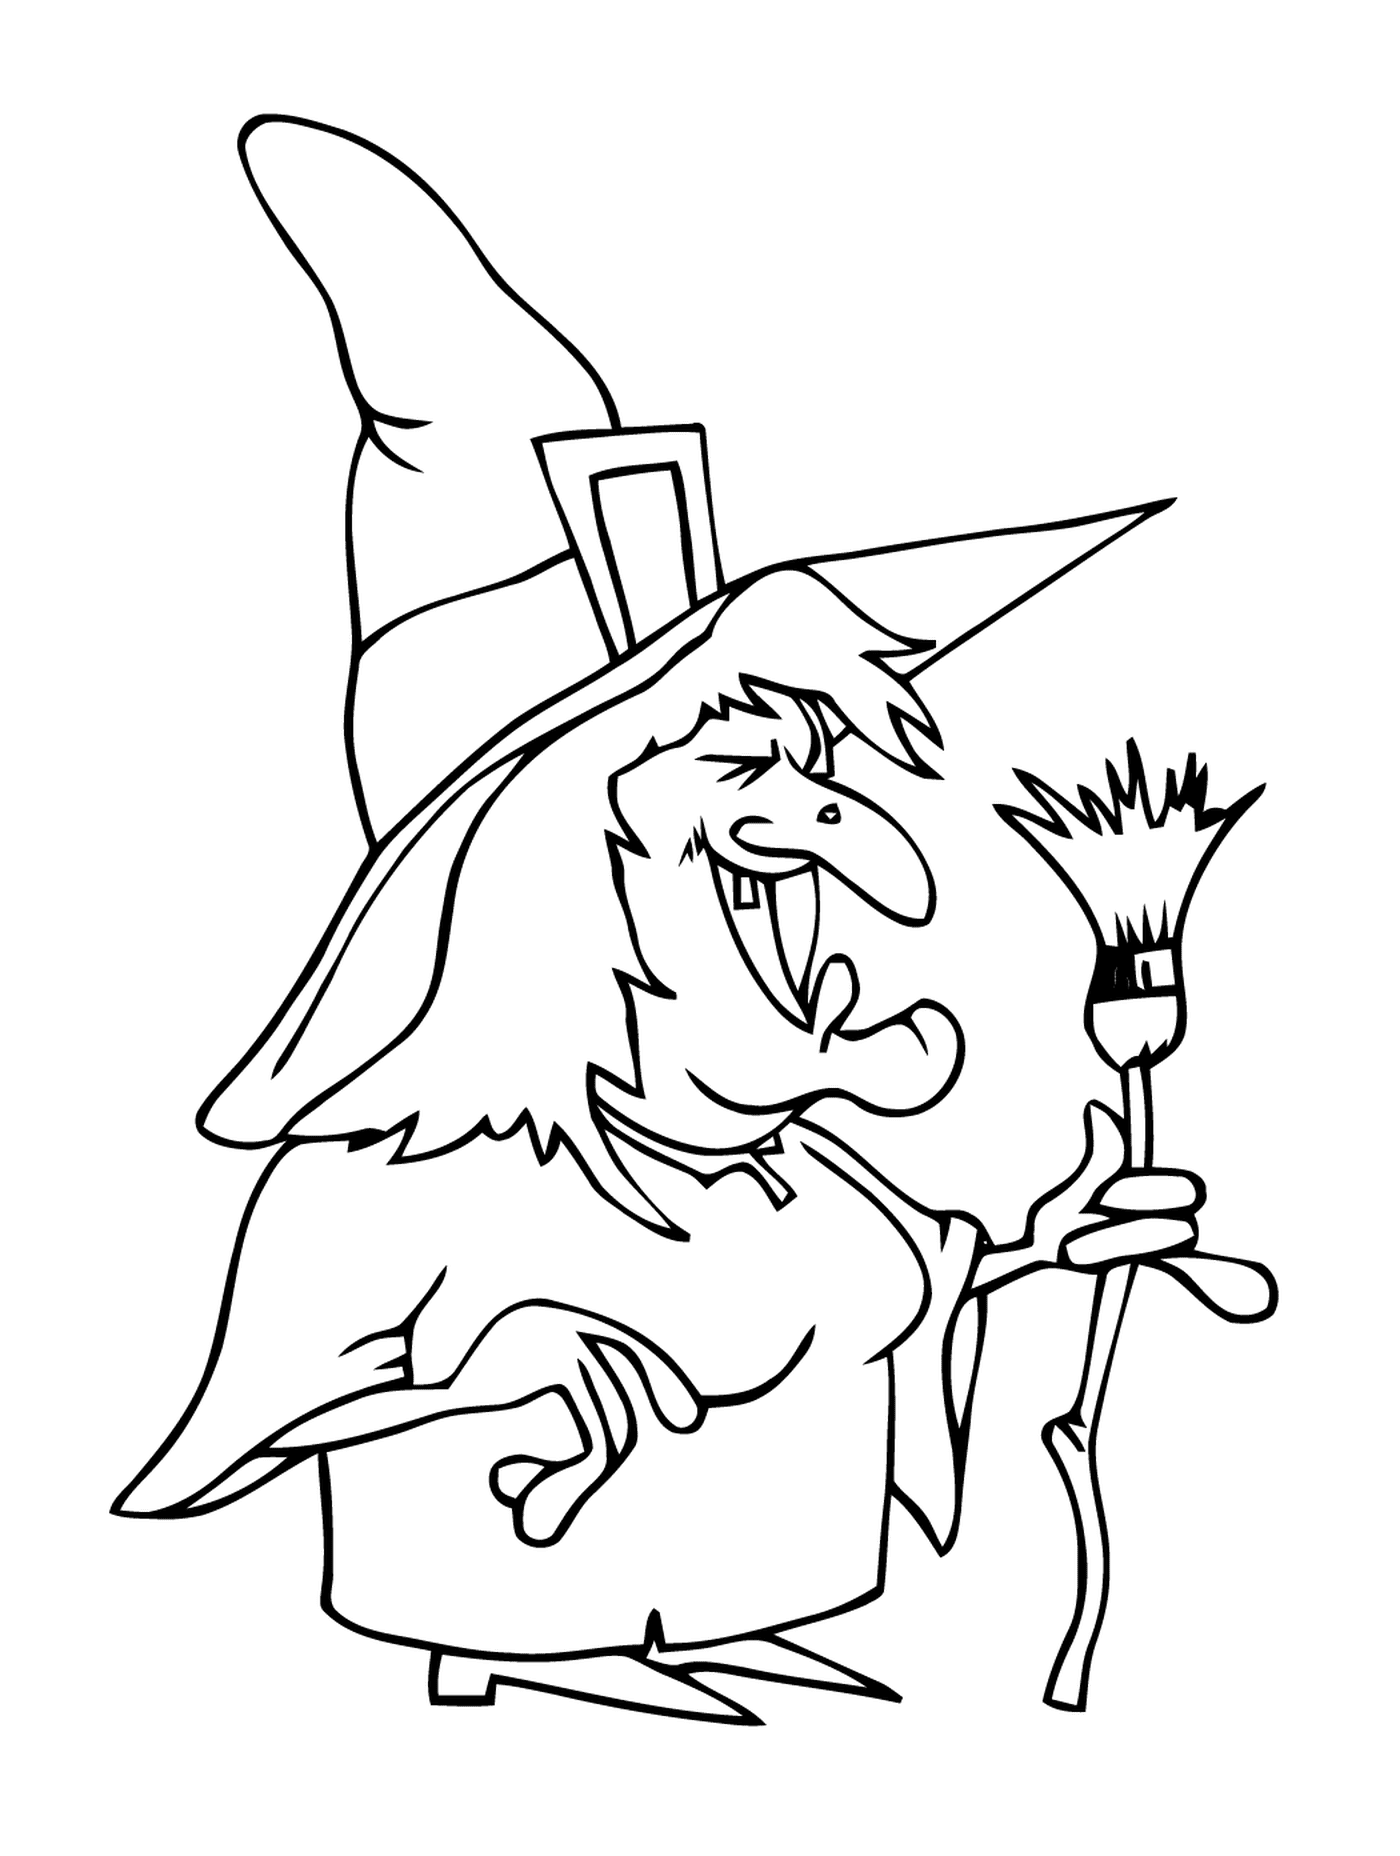  Horrible witch holding a broom 